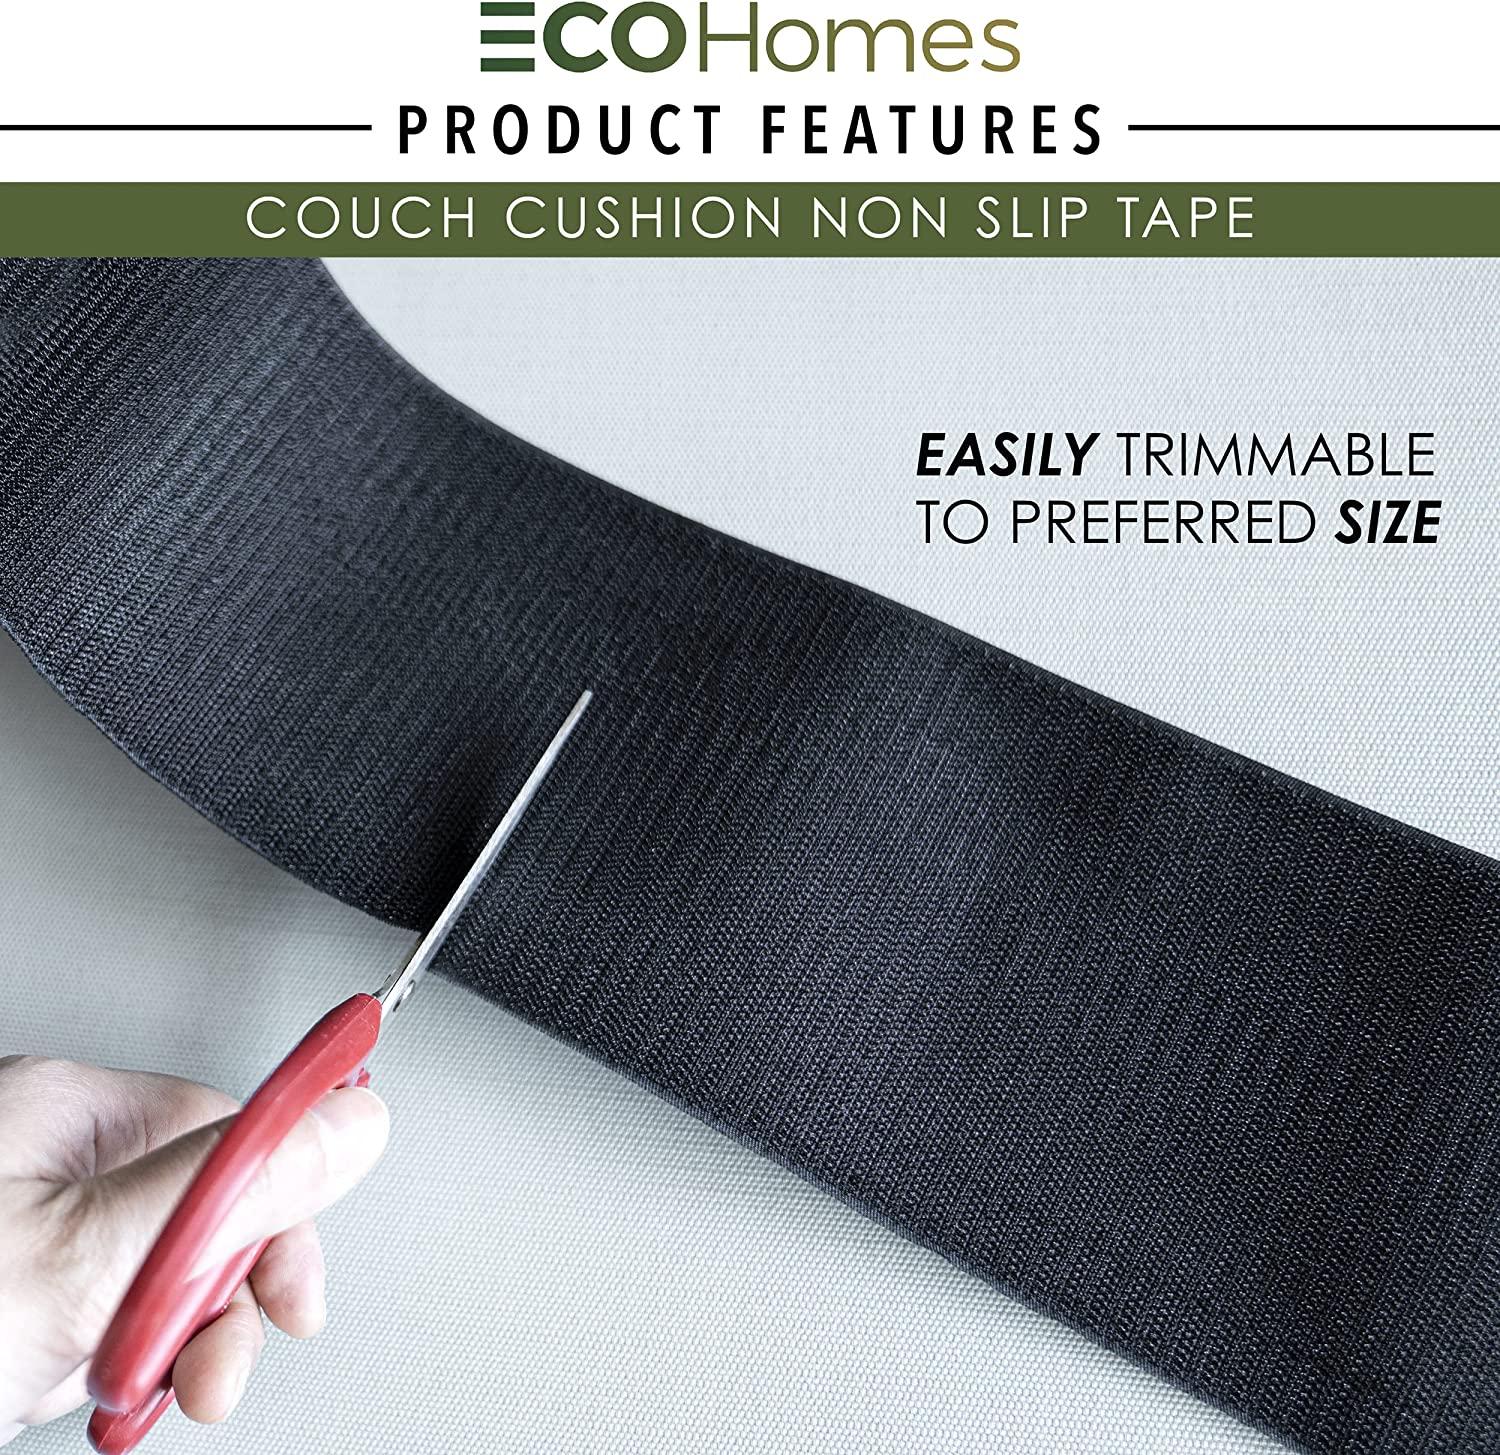 ECOHomes Couch Cushion Grip Tape Keep Couch Cushions from Sliding, Wide 4.4  Inch x 6.5 FT Heavy Duty Non Slip Cushion Pads Sheets, Strips with